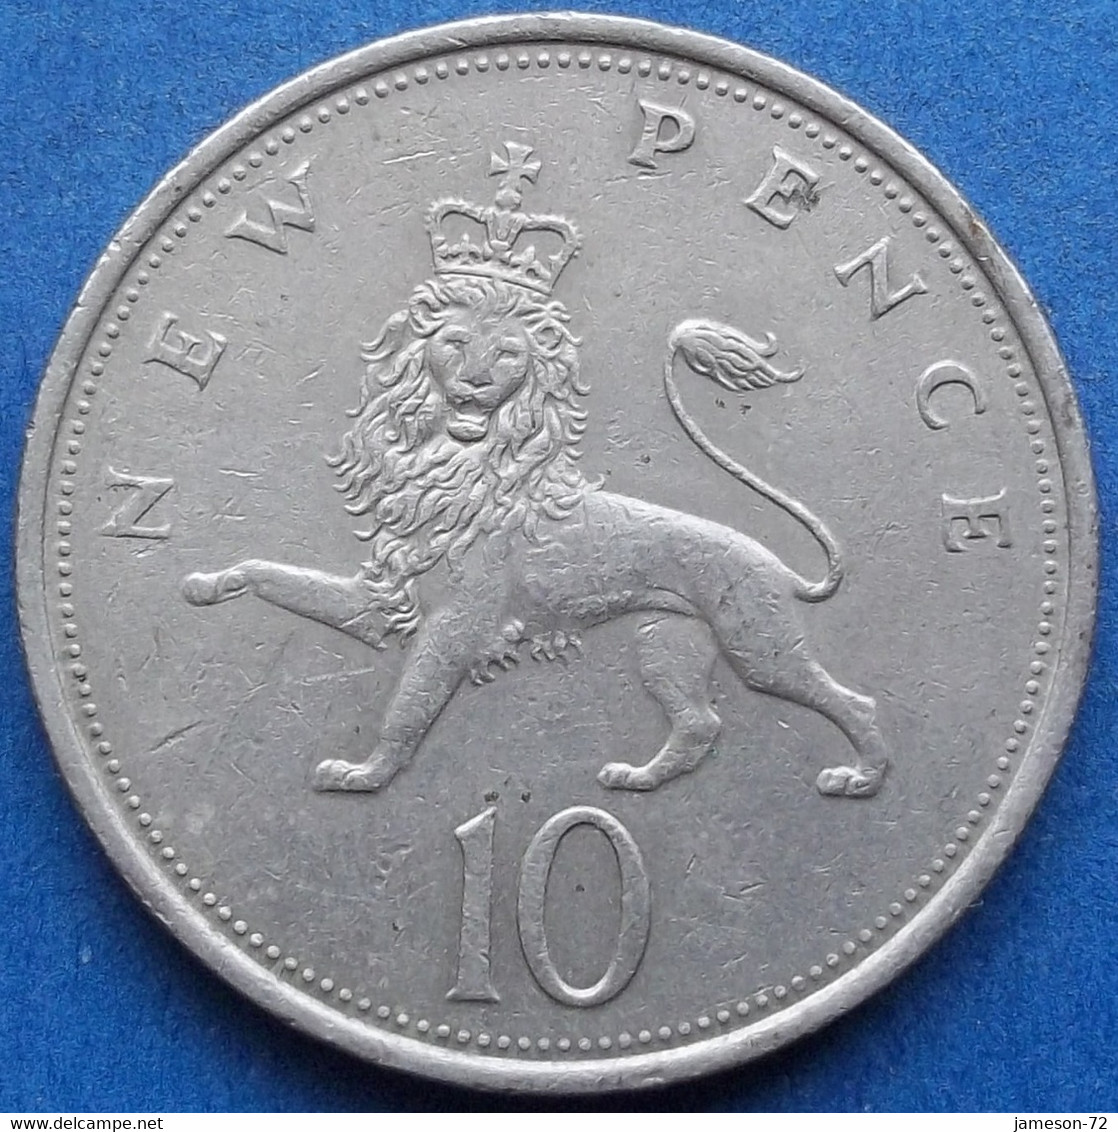 UK - 10 New Pence 1969 "Crowned Lion" KM# 912 Elizabeth II Decimal Coinage (1971-2022) - Edelweiss Coins - 10 Pence & 10 New Pence